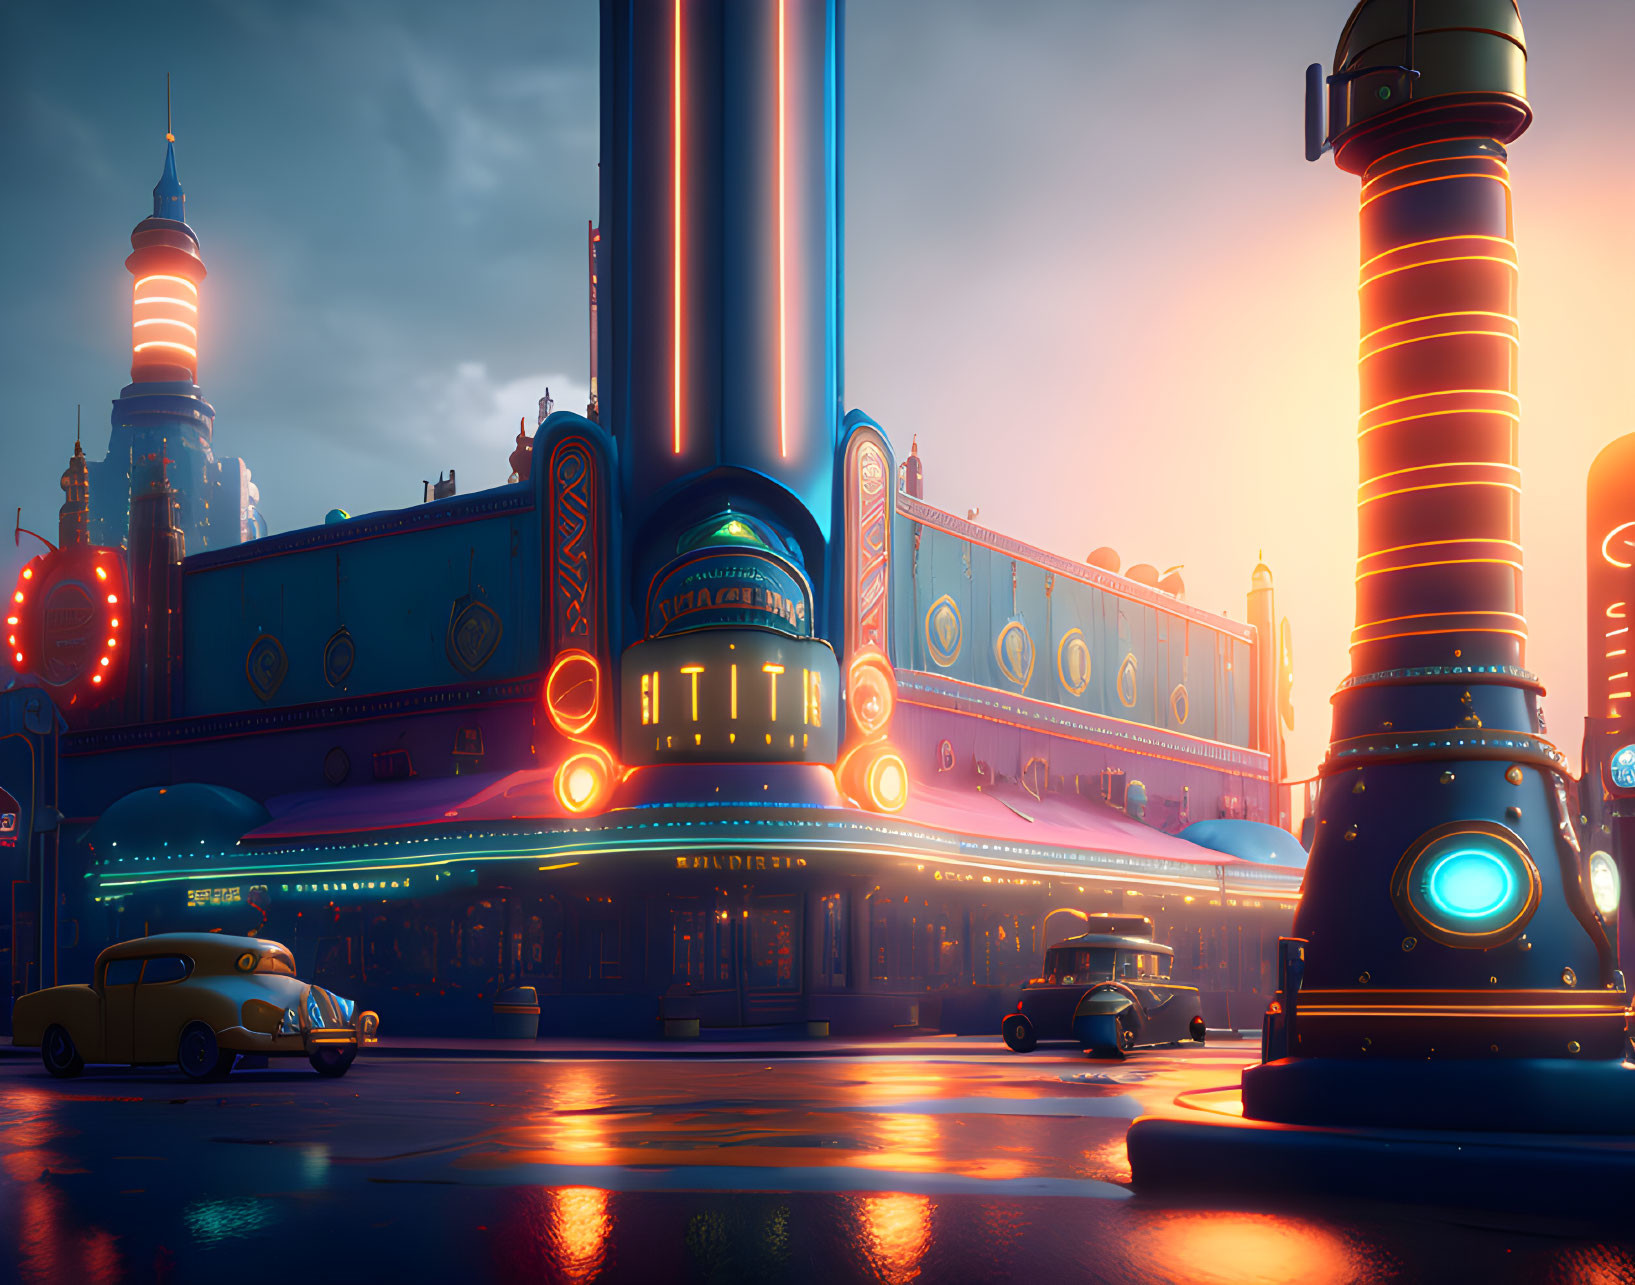 Futuristic cityscape with neon lights, art deco buildings, vintage cars, and skyscrapers